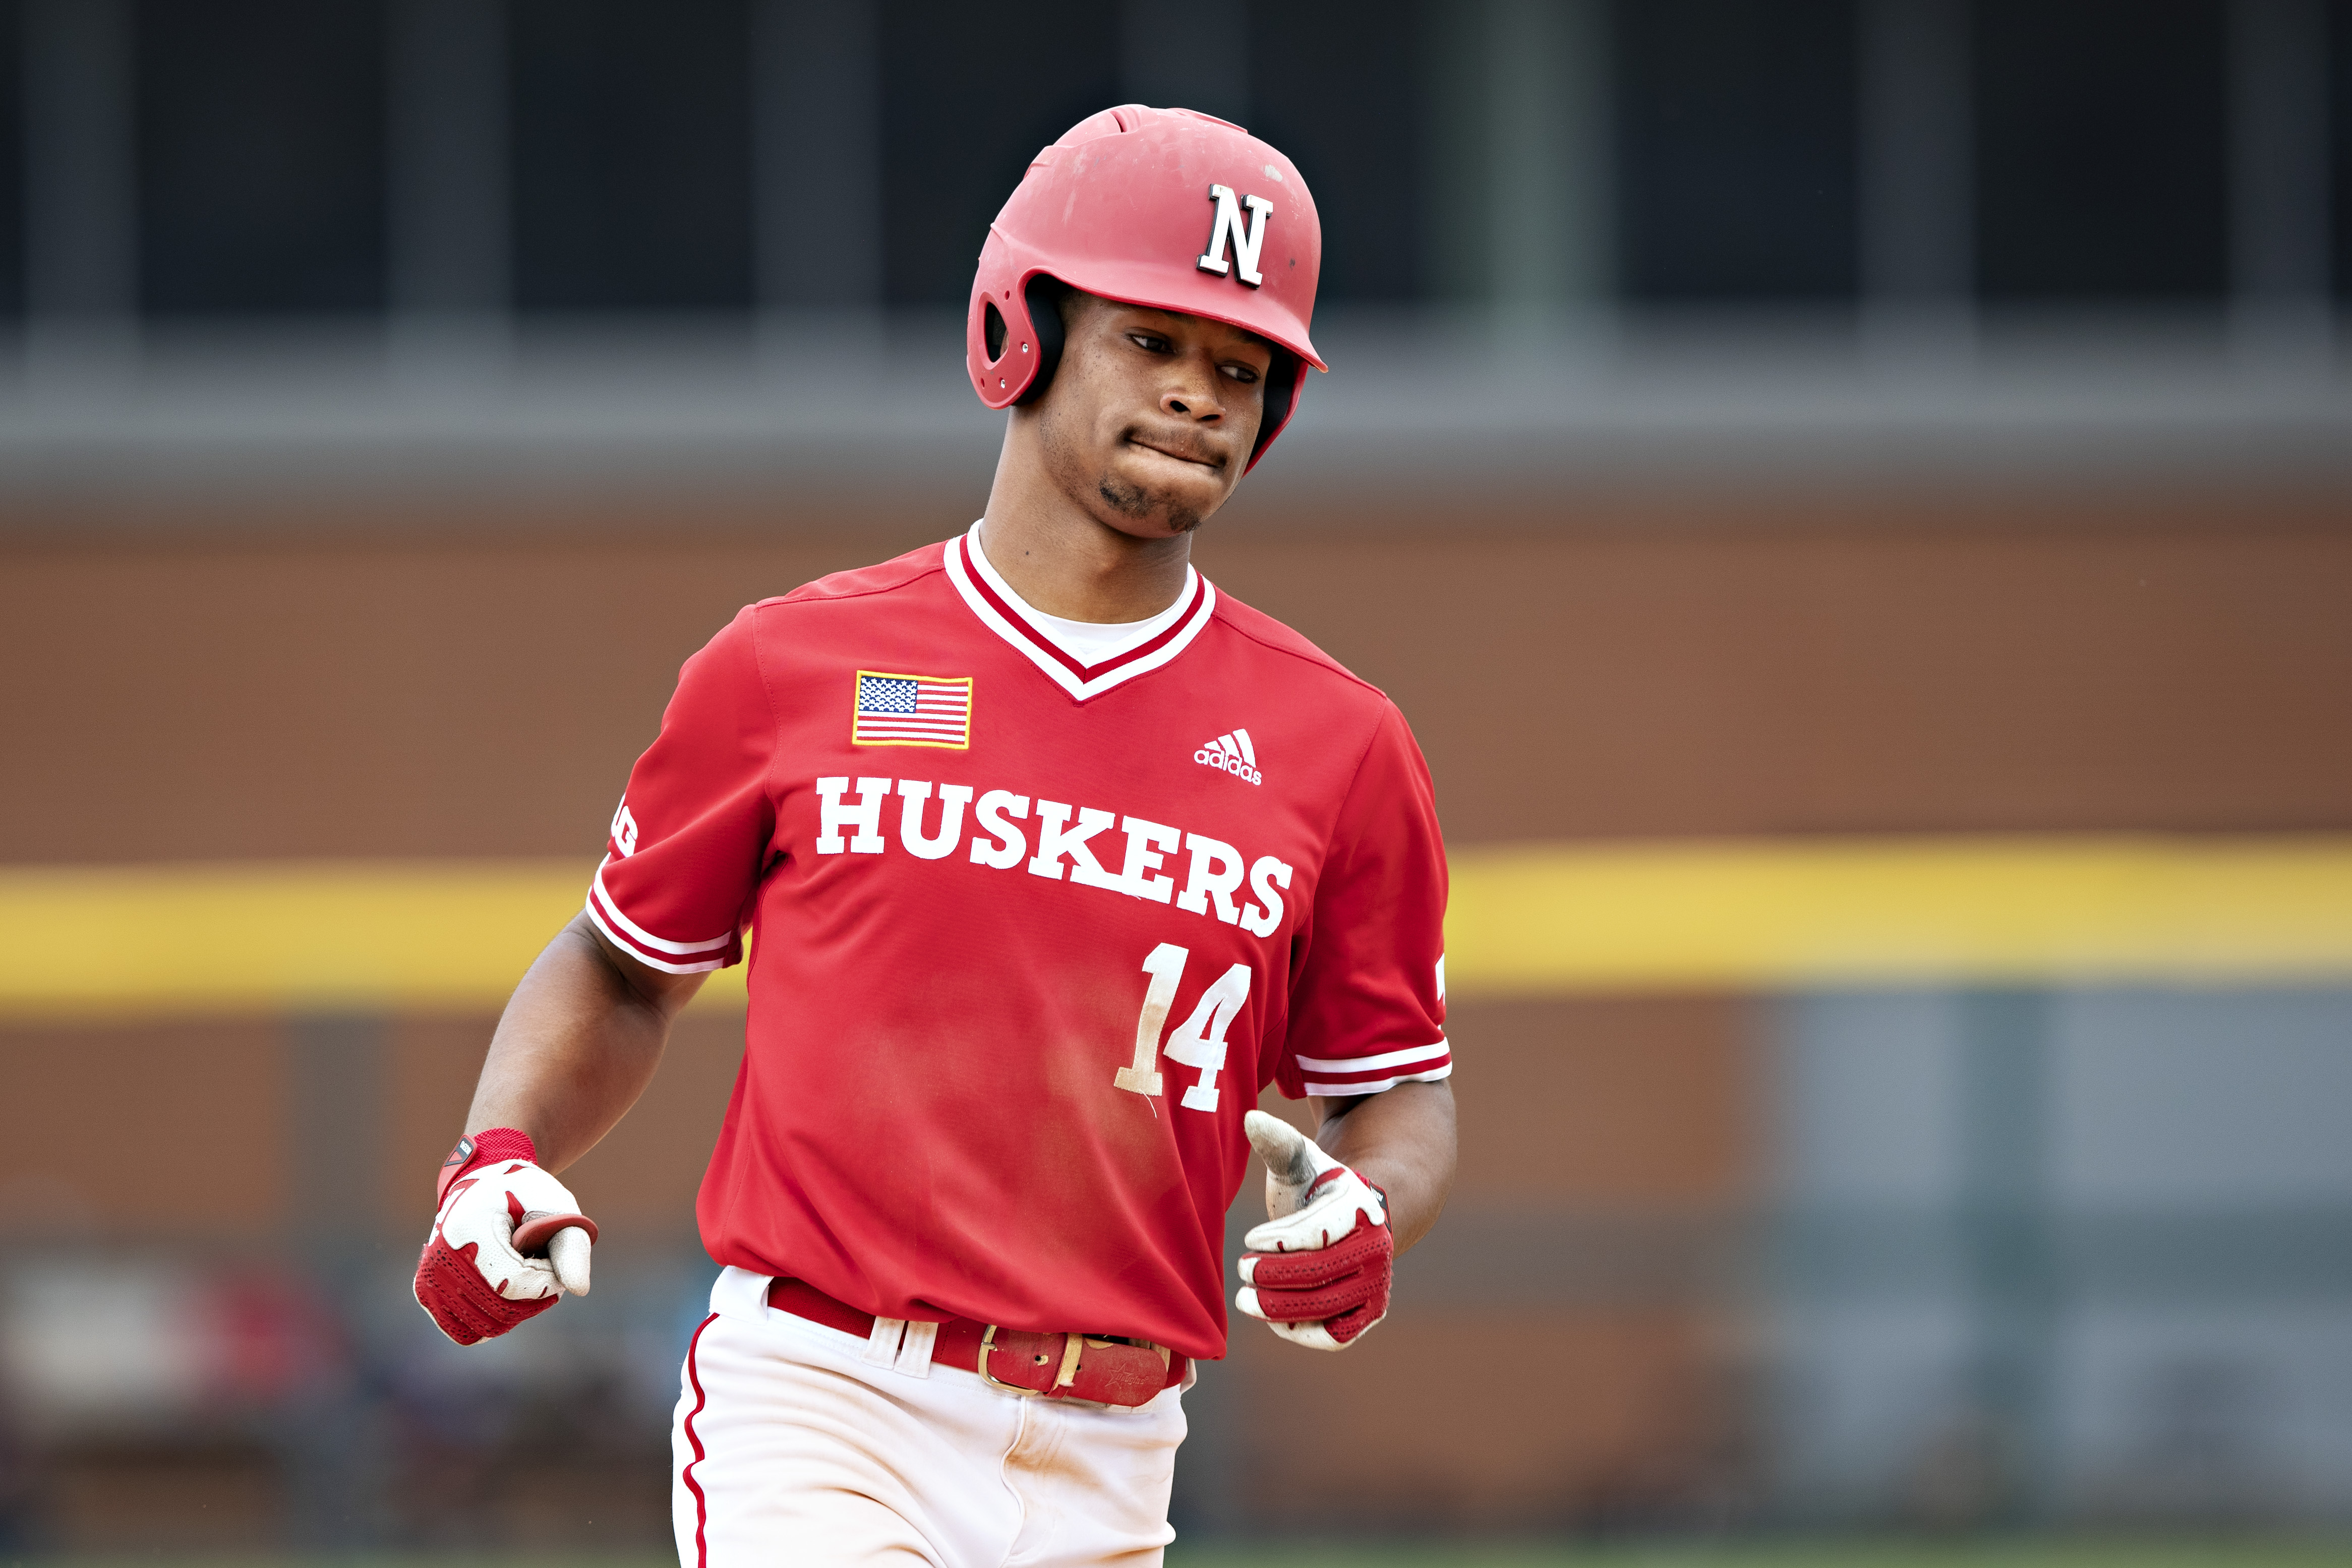 College Baseball Regional 2021: Results, Highlights and Bracket from Sunday, News, Scores, Highlights, Stats, and Rumors